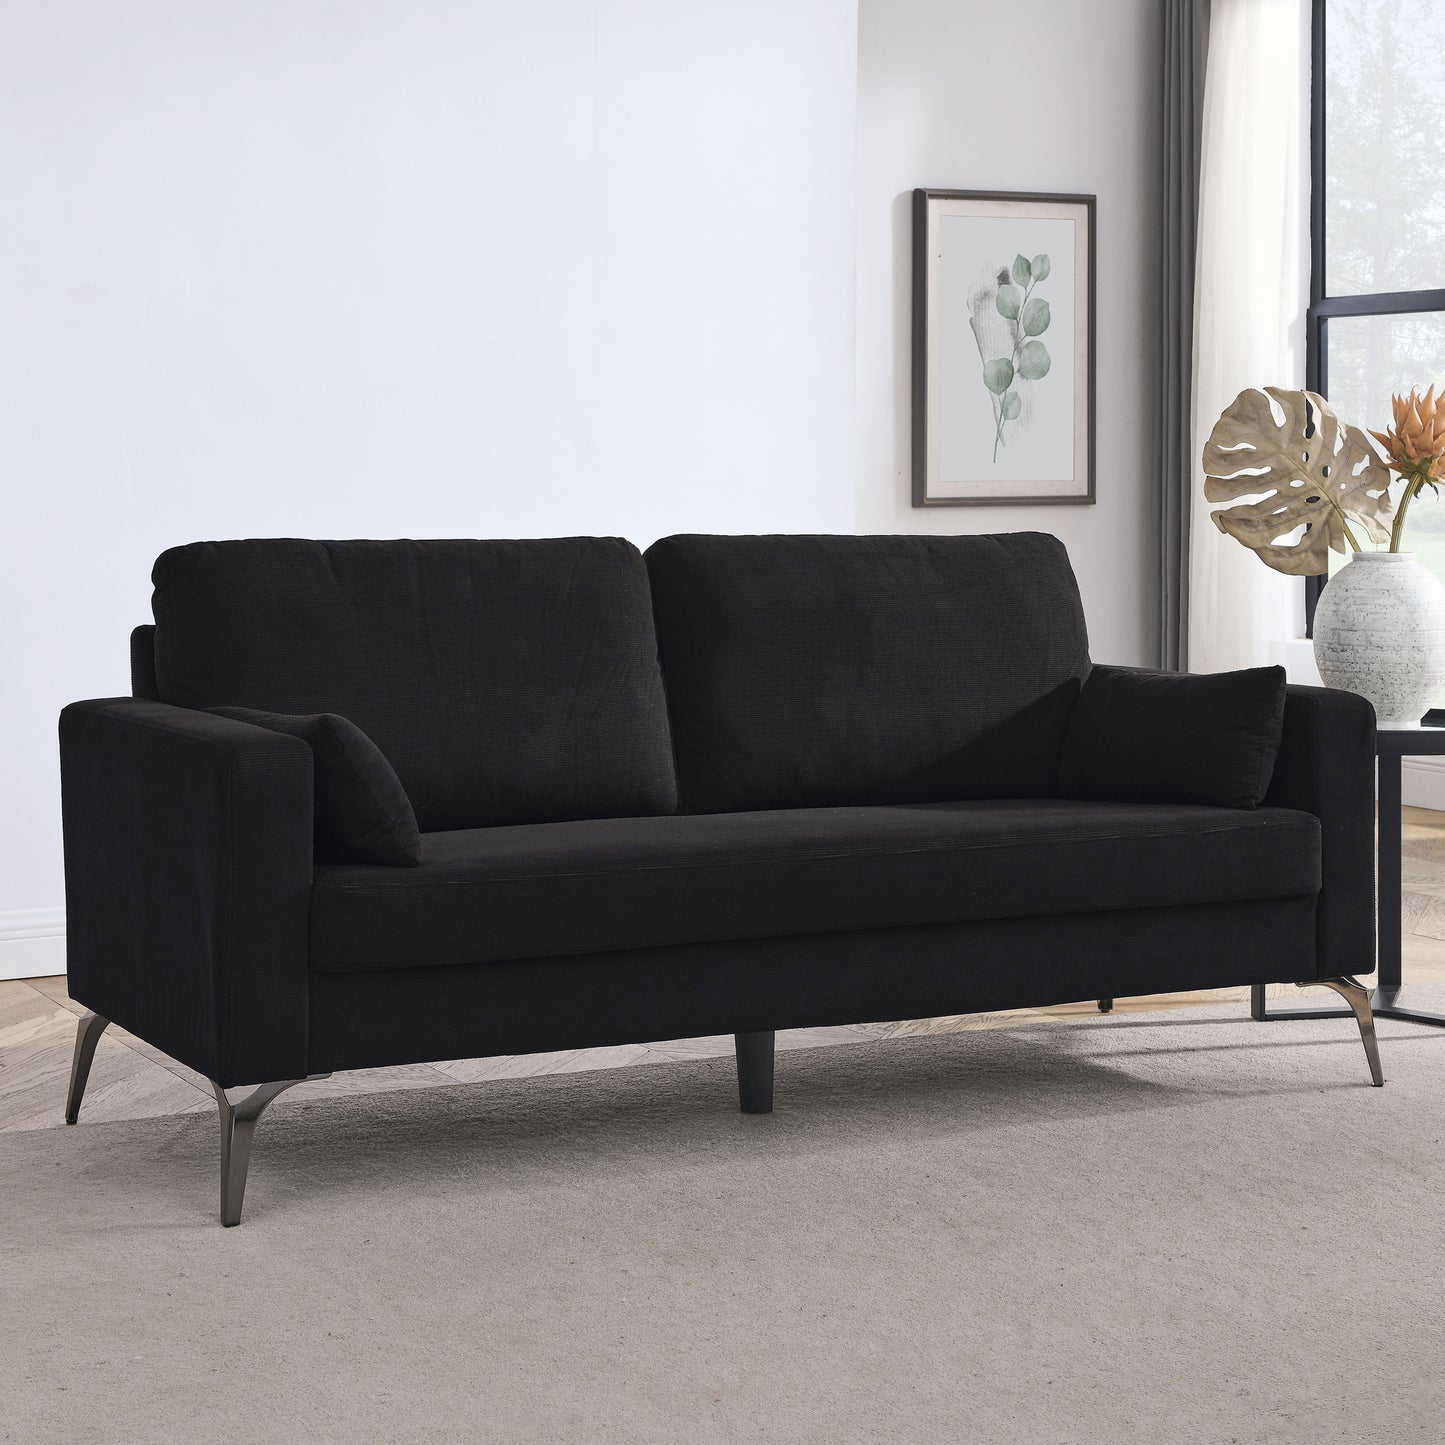 3 Piece Living Room Sofa Set, including 3-Seater Sofa, Loveseat and Sofa Chair, with Two Small Pillows, Corduroy Black